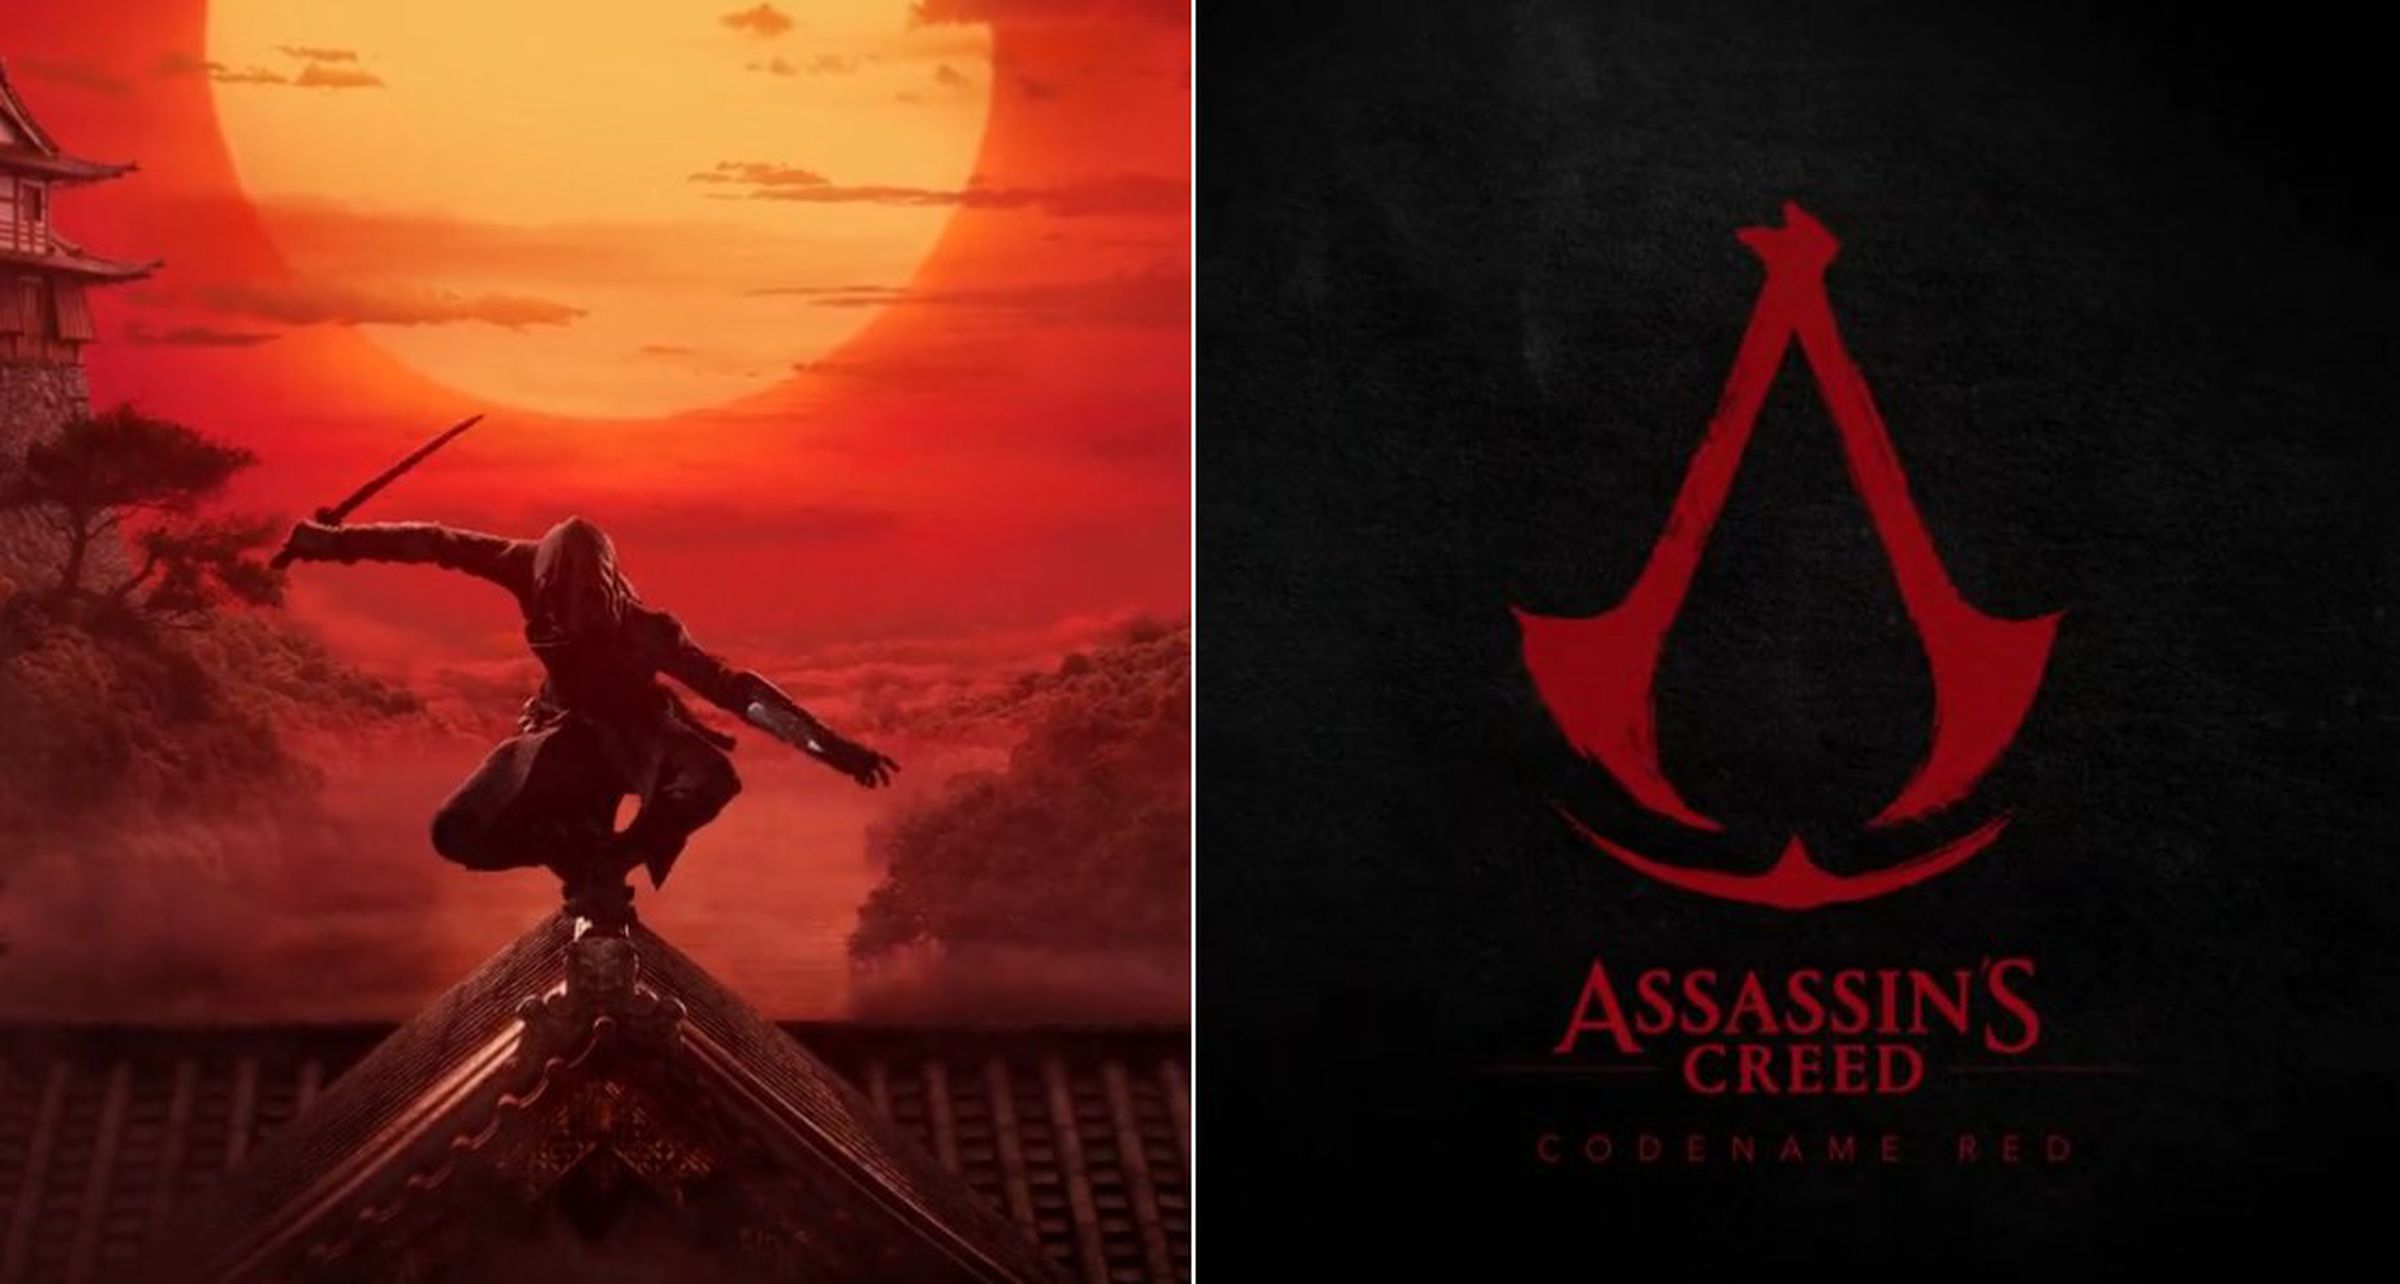 Assassin’s Creed: Codename Red logo and title image, showing one of the game’s assassins in a ninja-style pose in front of a setting sun.